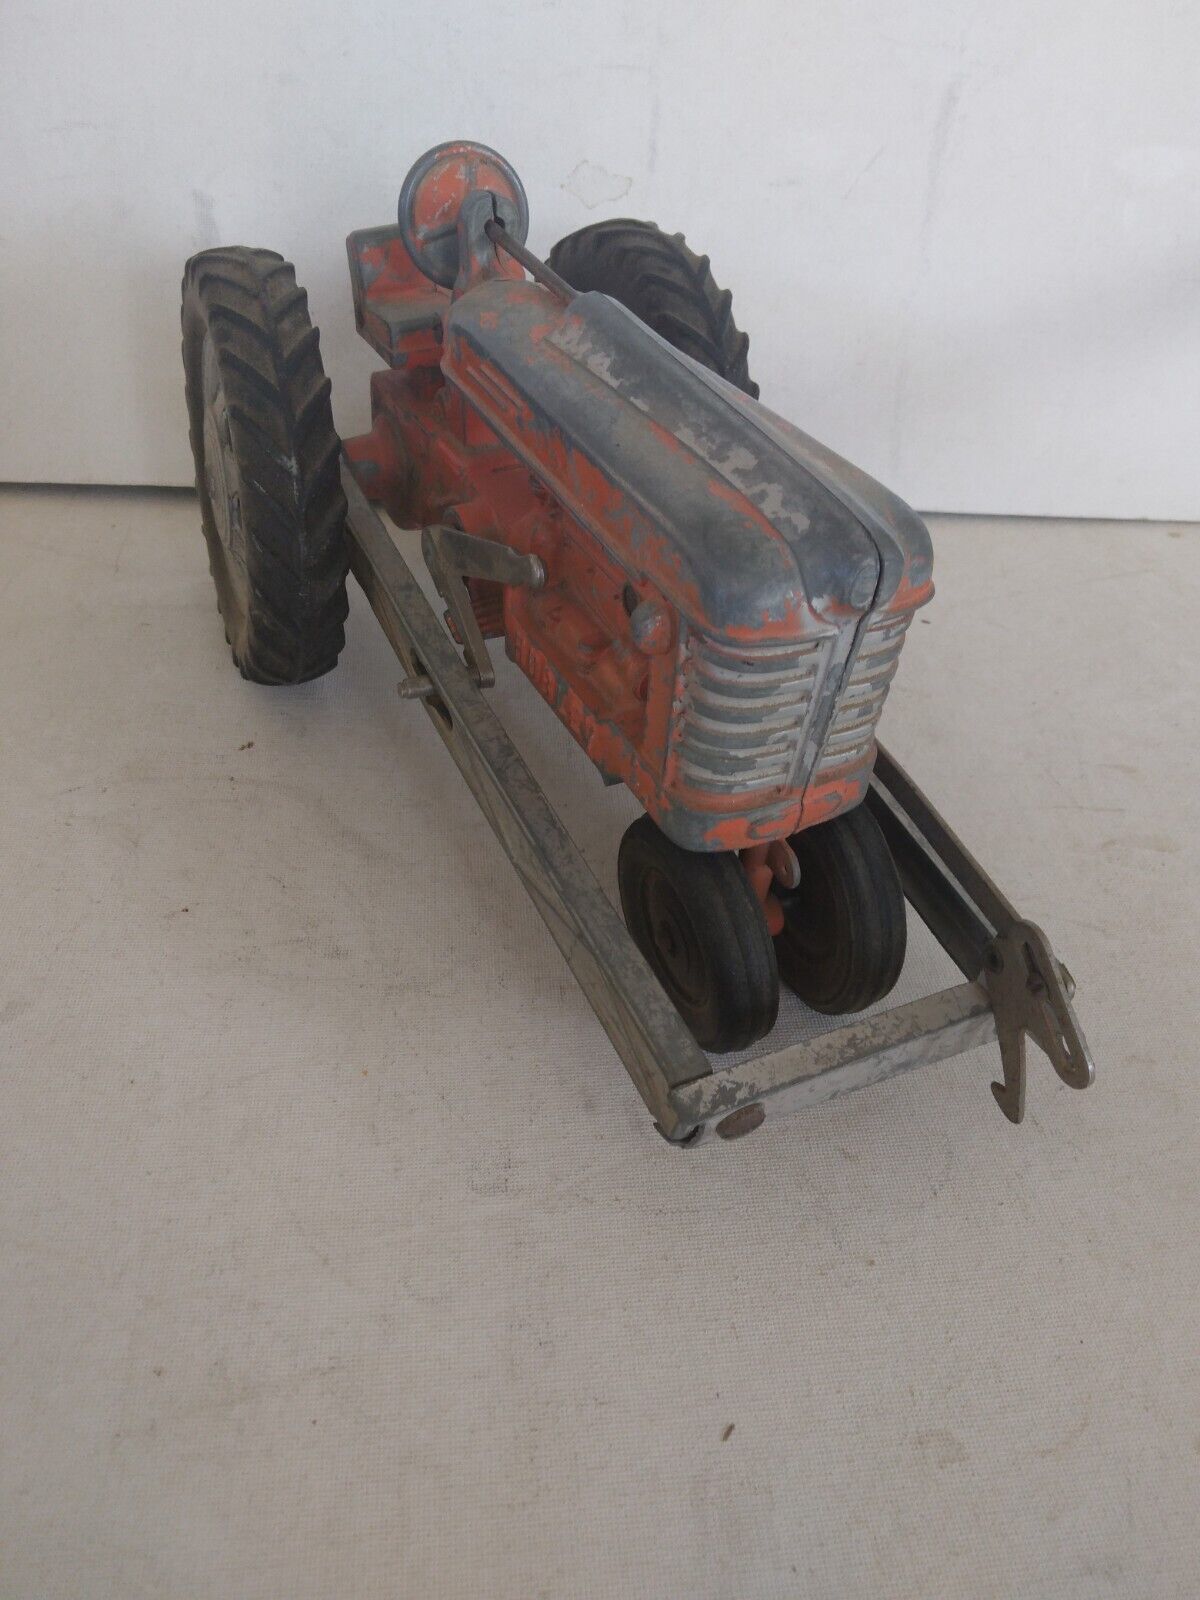 Vintage 1950's Orange Hubley Pressed Steel Toy Tractor #490 - Made in USA - $18.95